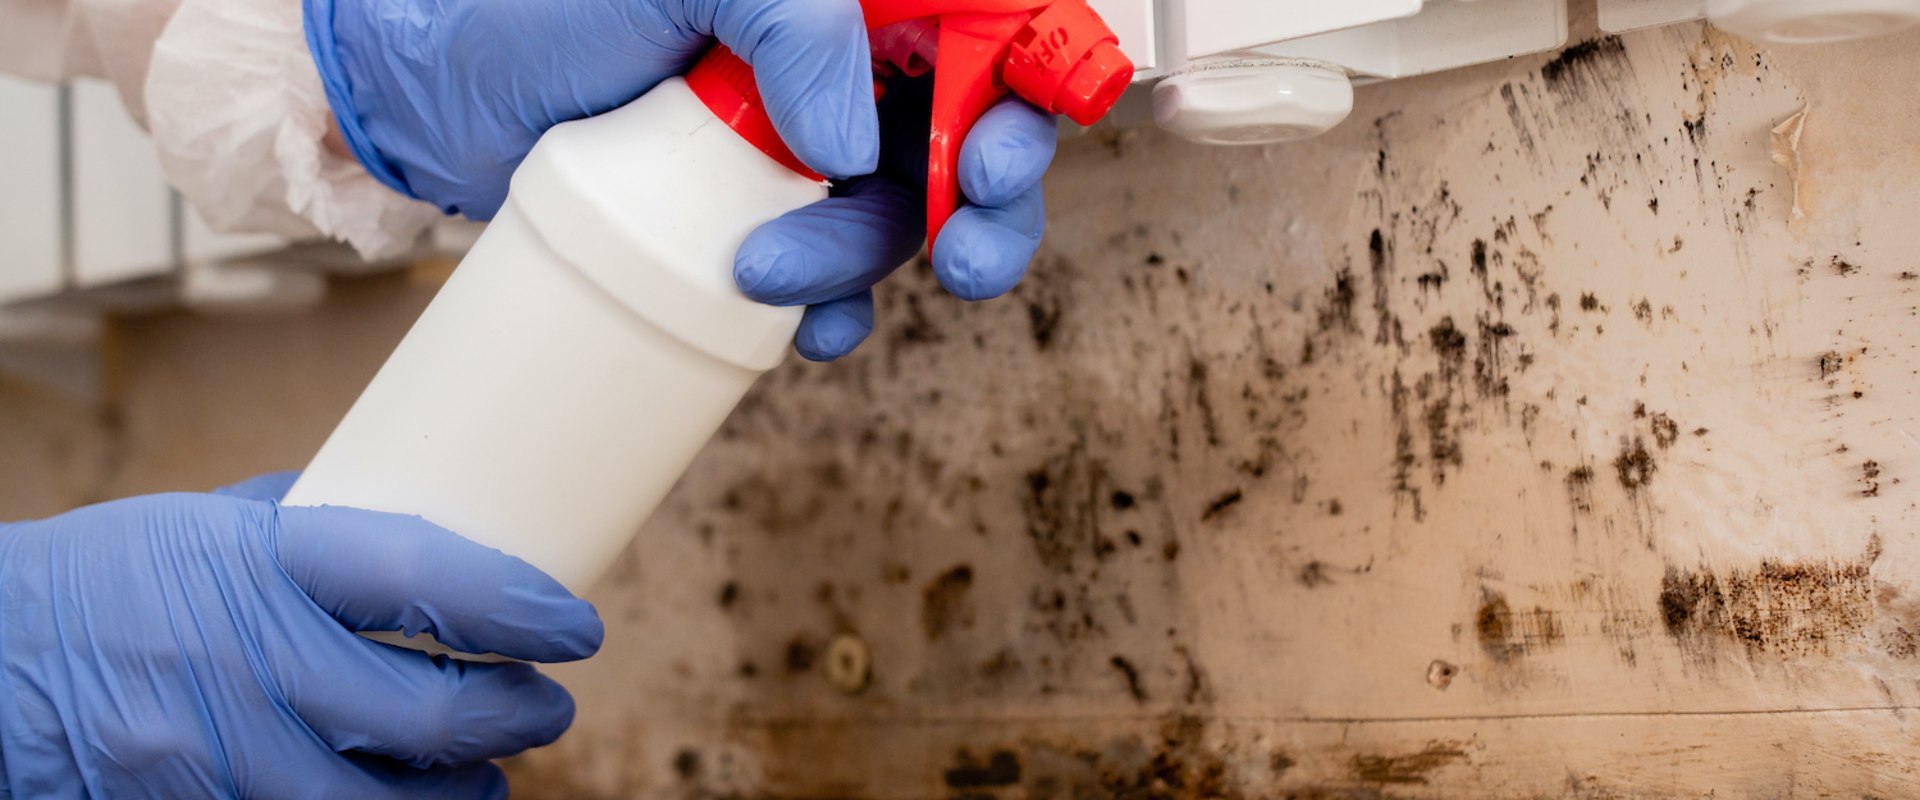 How Much Does a Mold Inspection Cost in Chicago?